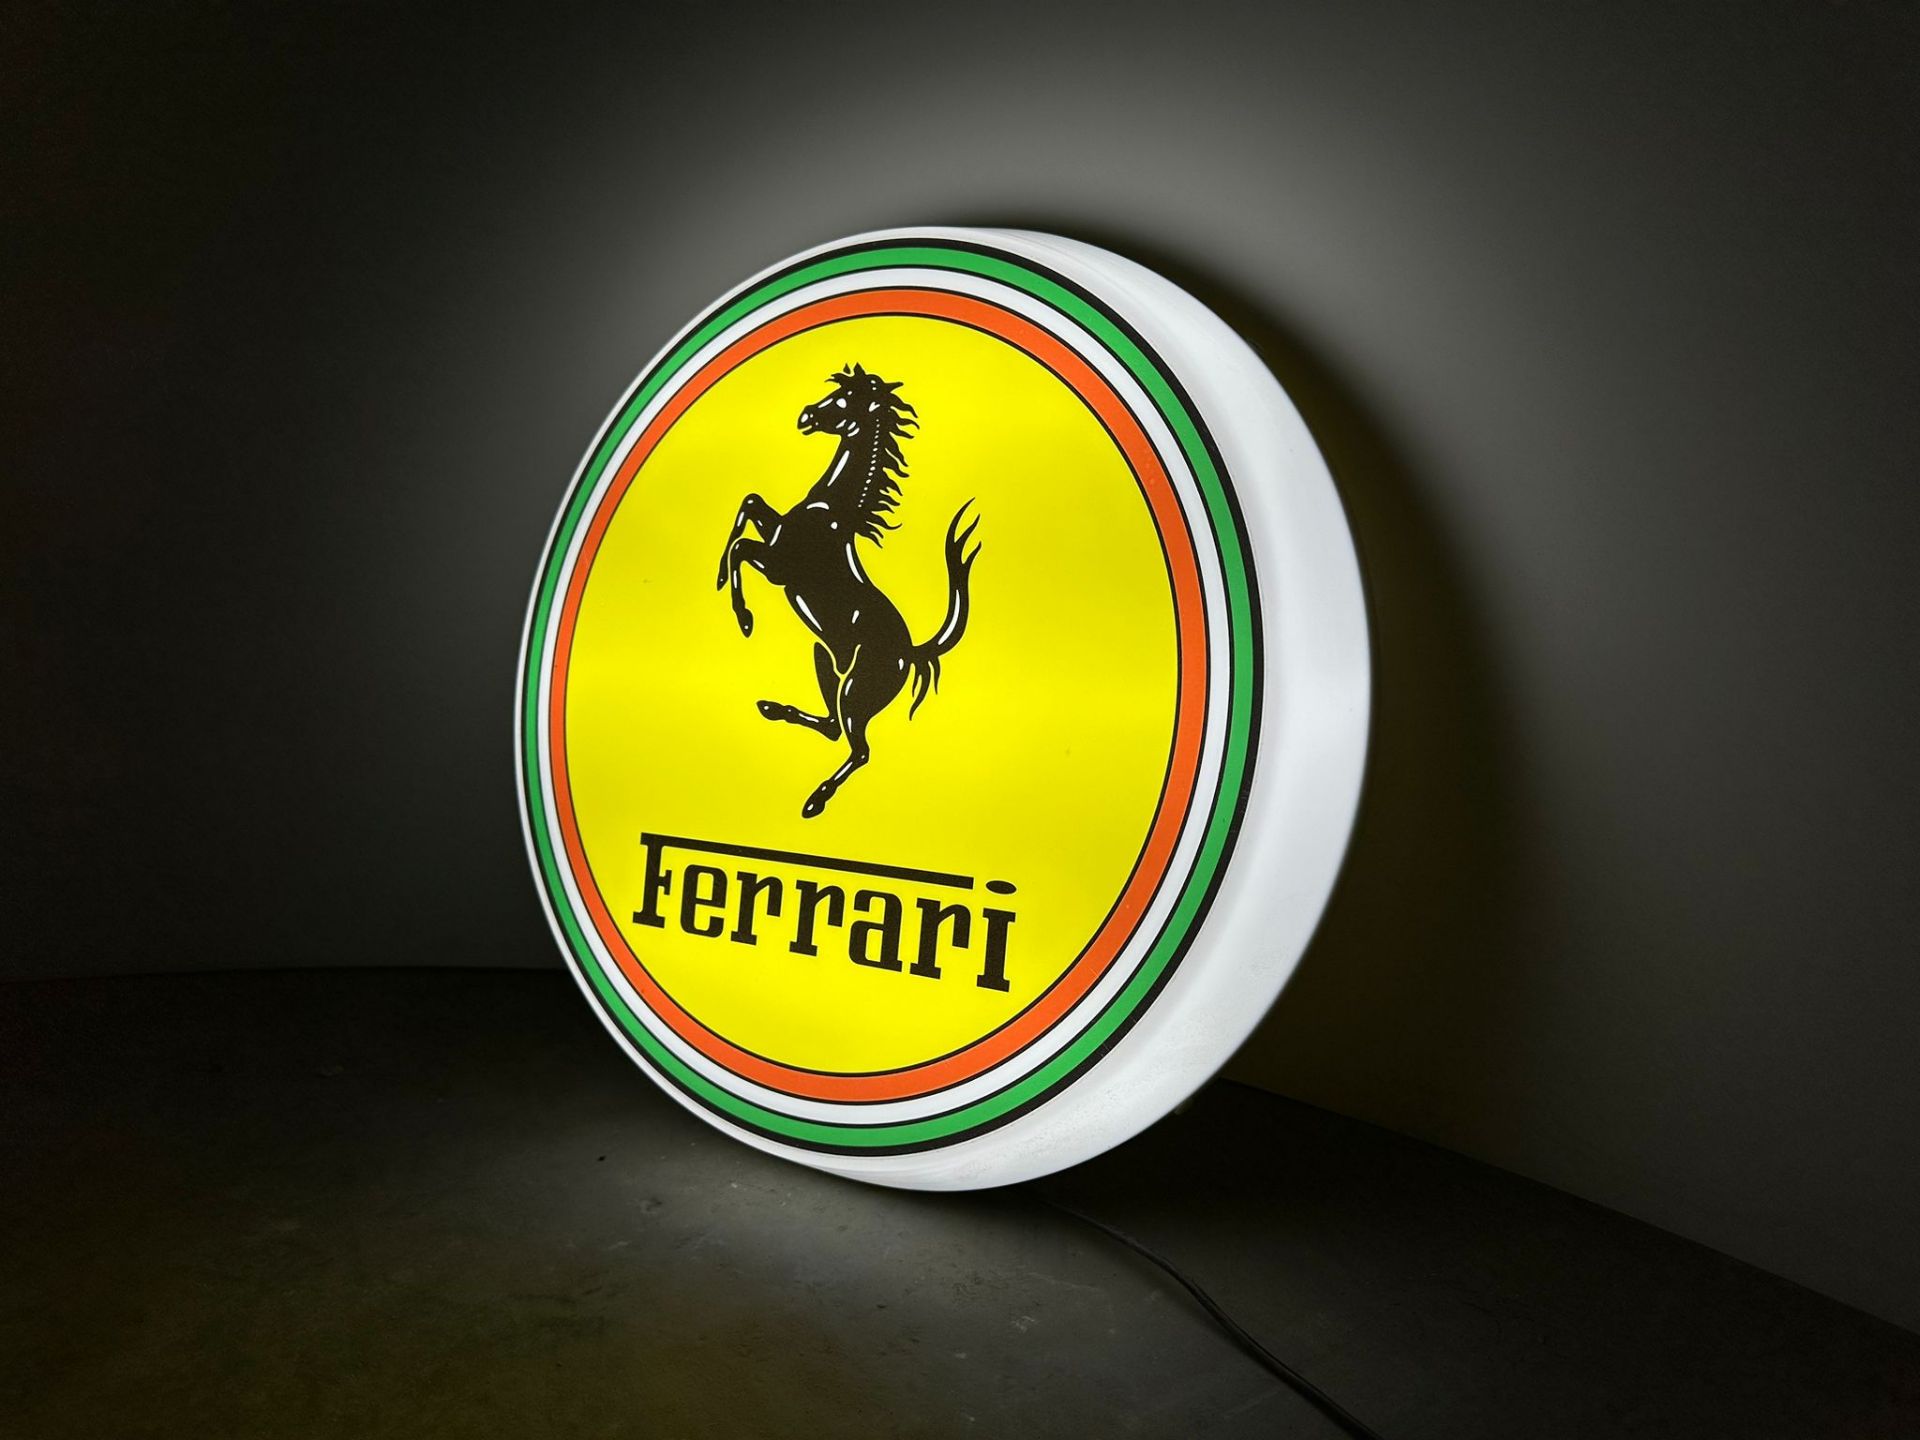 Ferrari fully working illuminated adapted to any country - Image 6 of 6